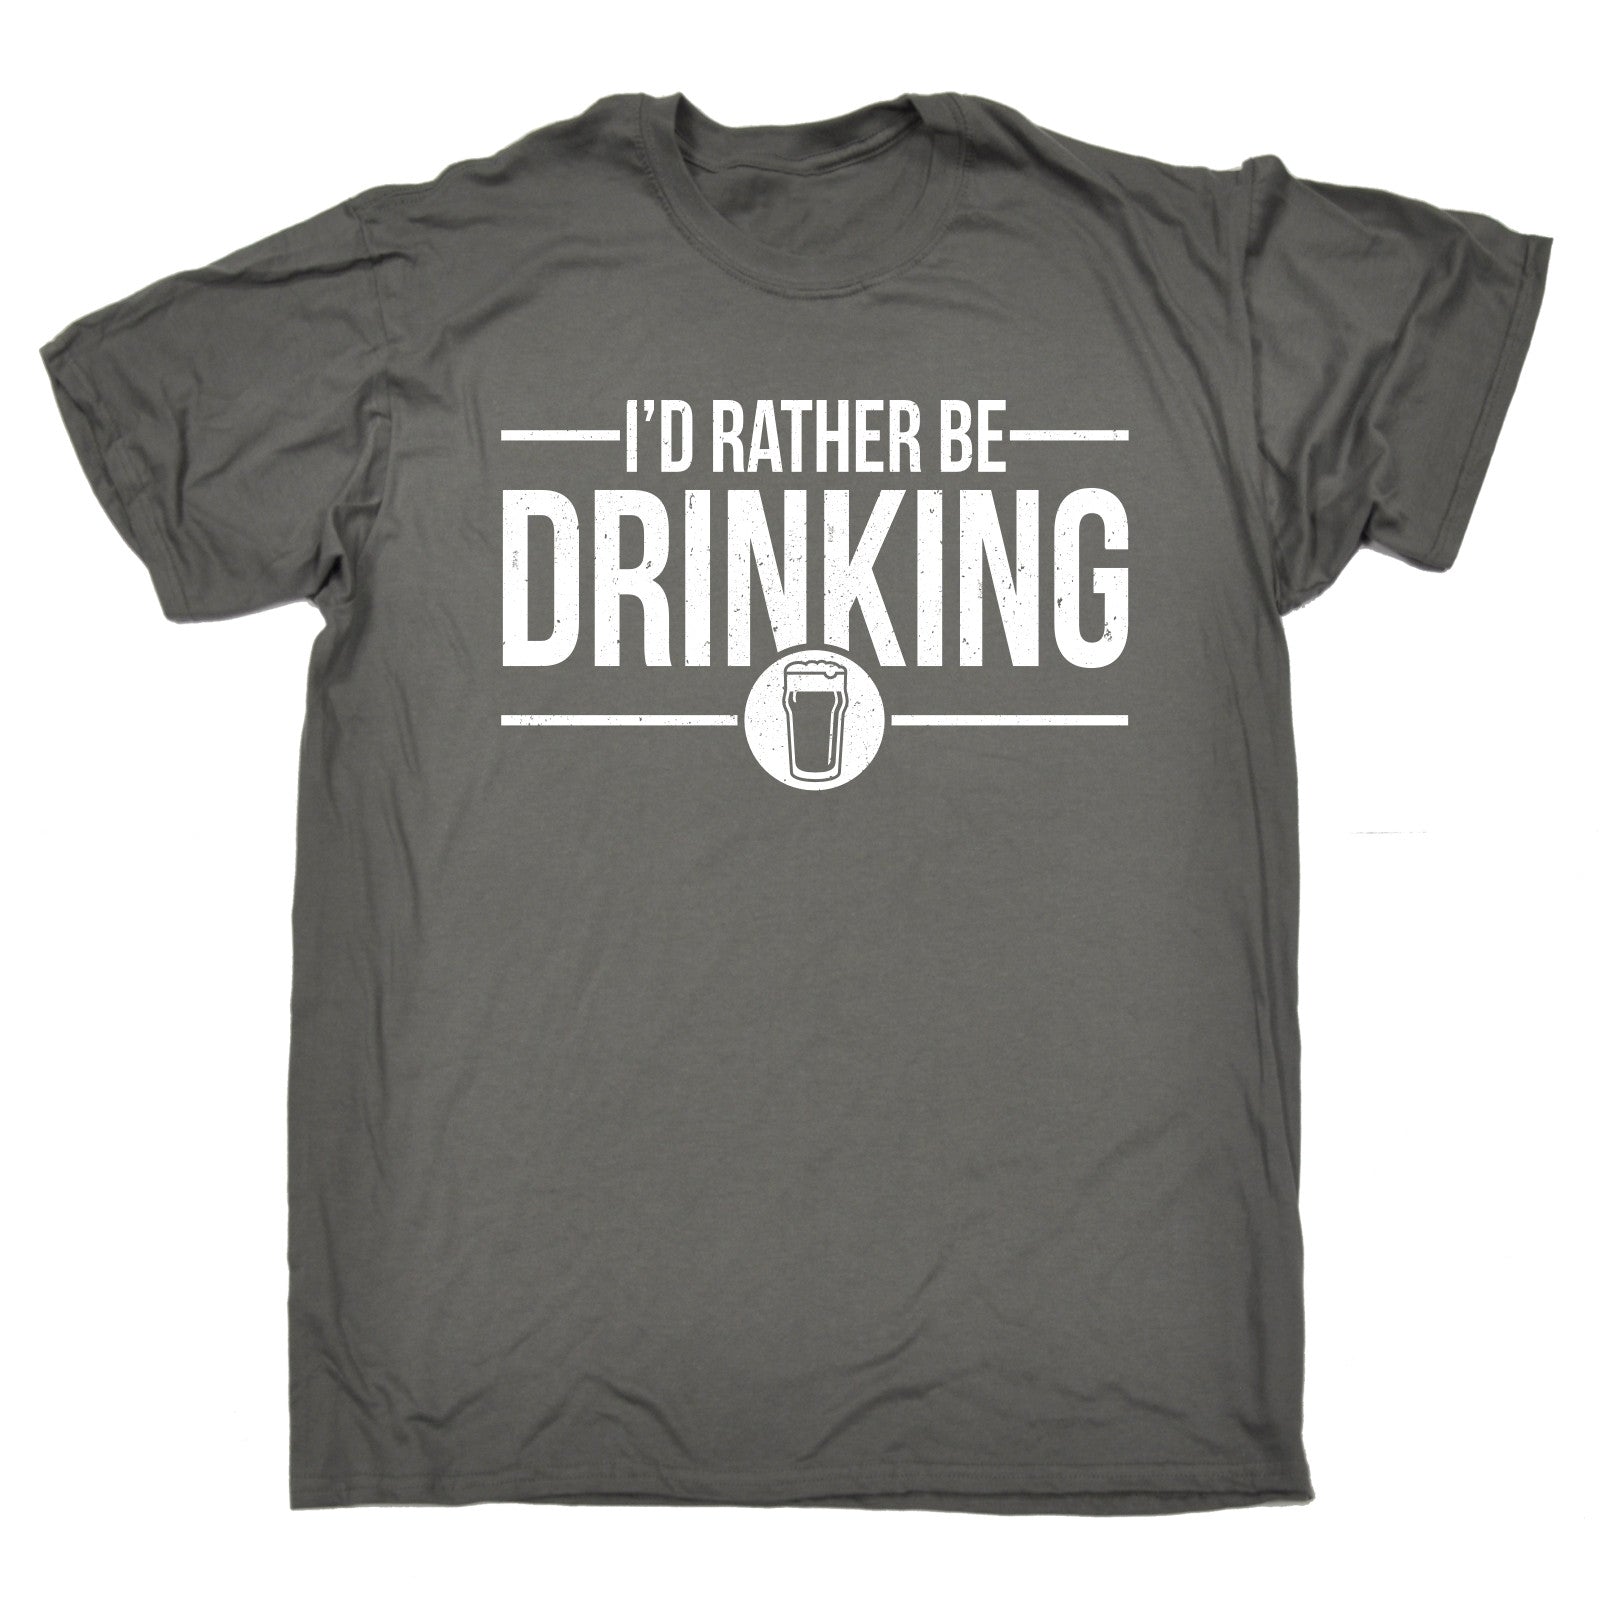 Id Rather Be Drinking MENS T-SHIRT tee birthday gift beer wine alcohol ...